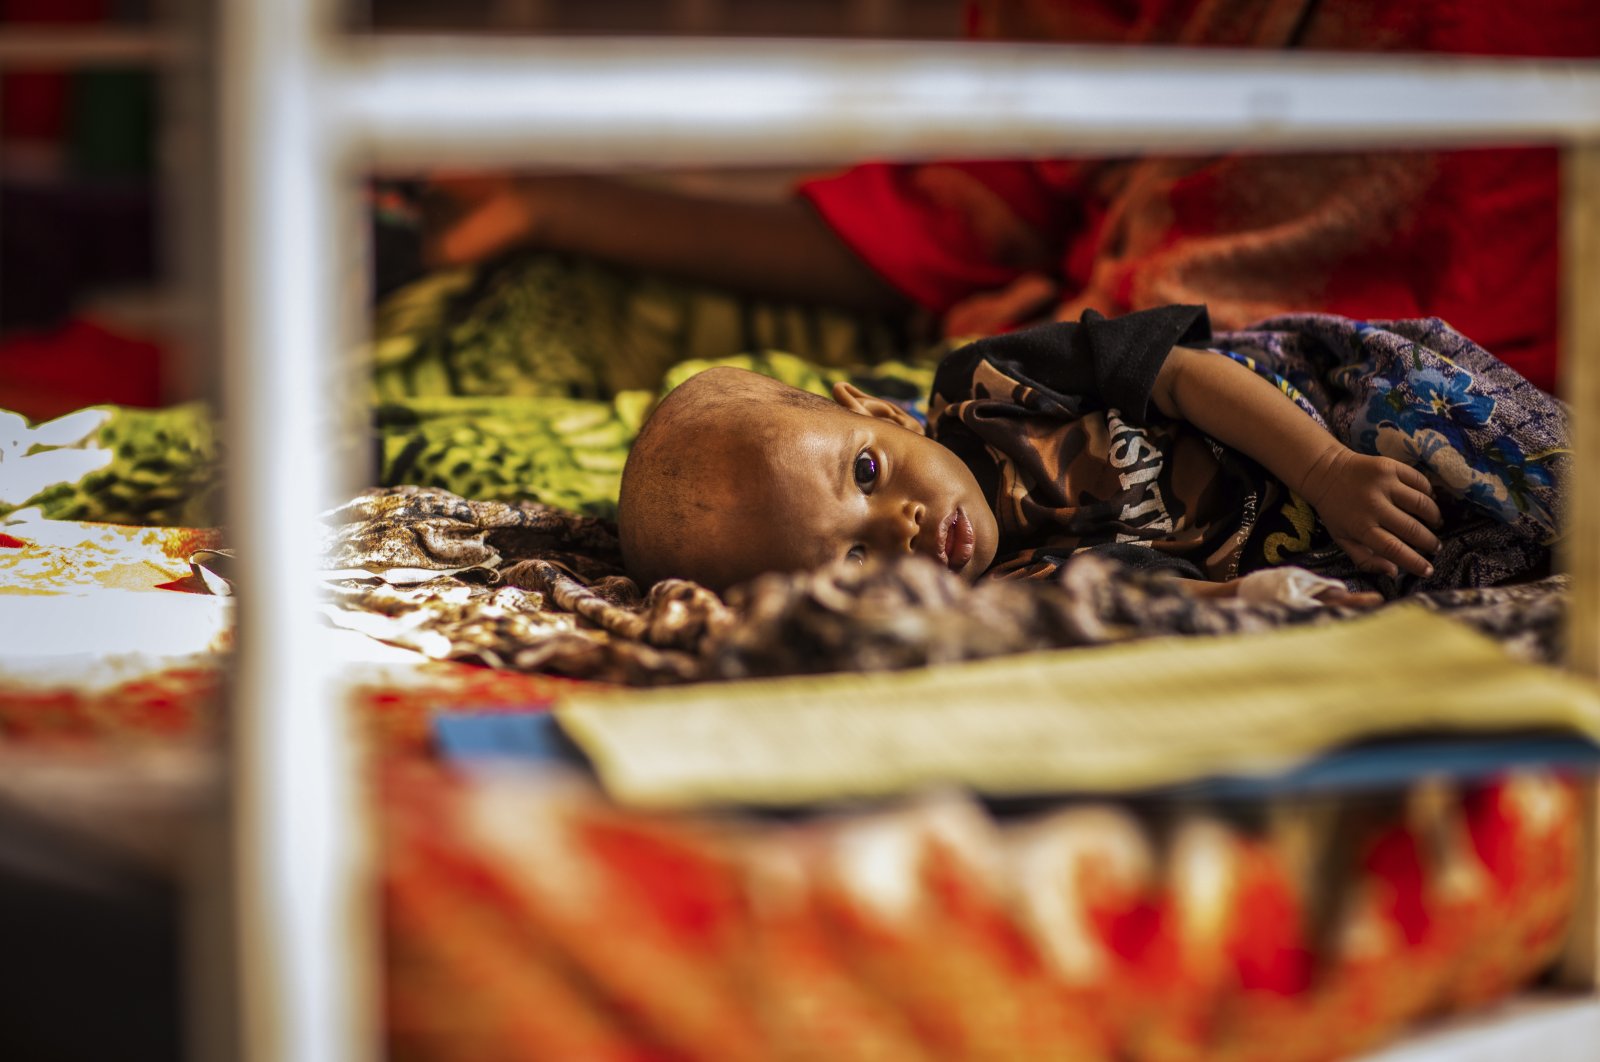 A severely malnourished baby receives treatment at a UNICEF-supported stabilization center at Gode Hospital in the Shabelle Zone of the Somali region of Ethiopia, April 12, 2022. (AP Photo)